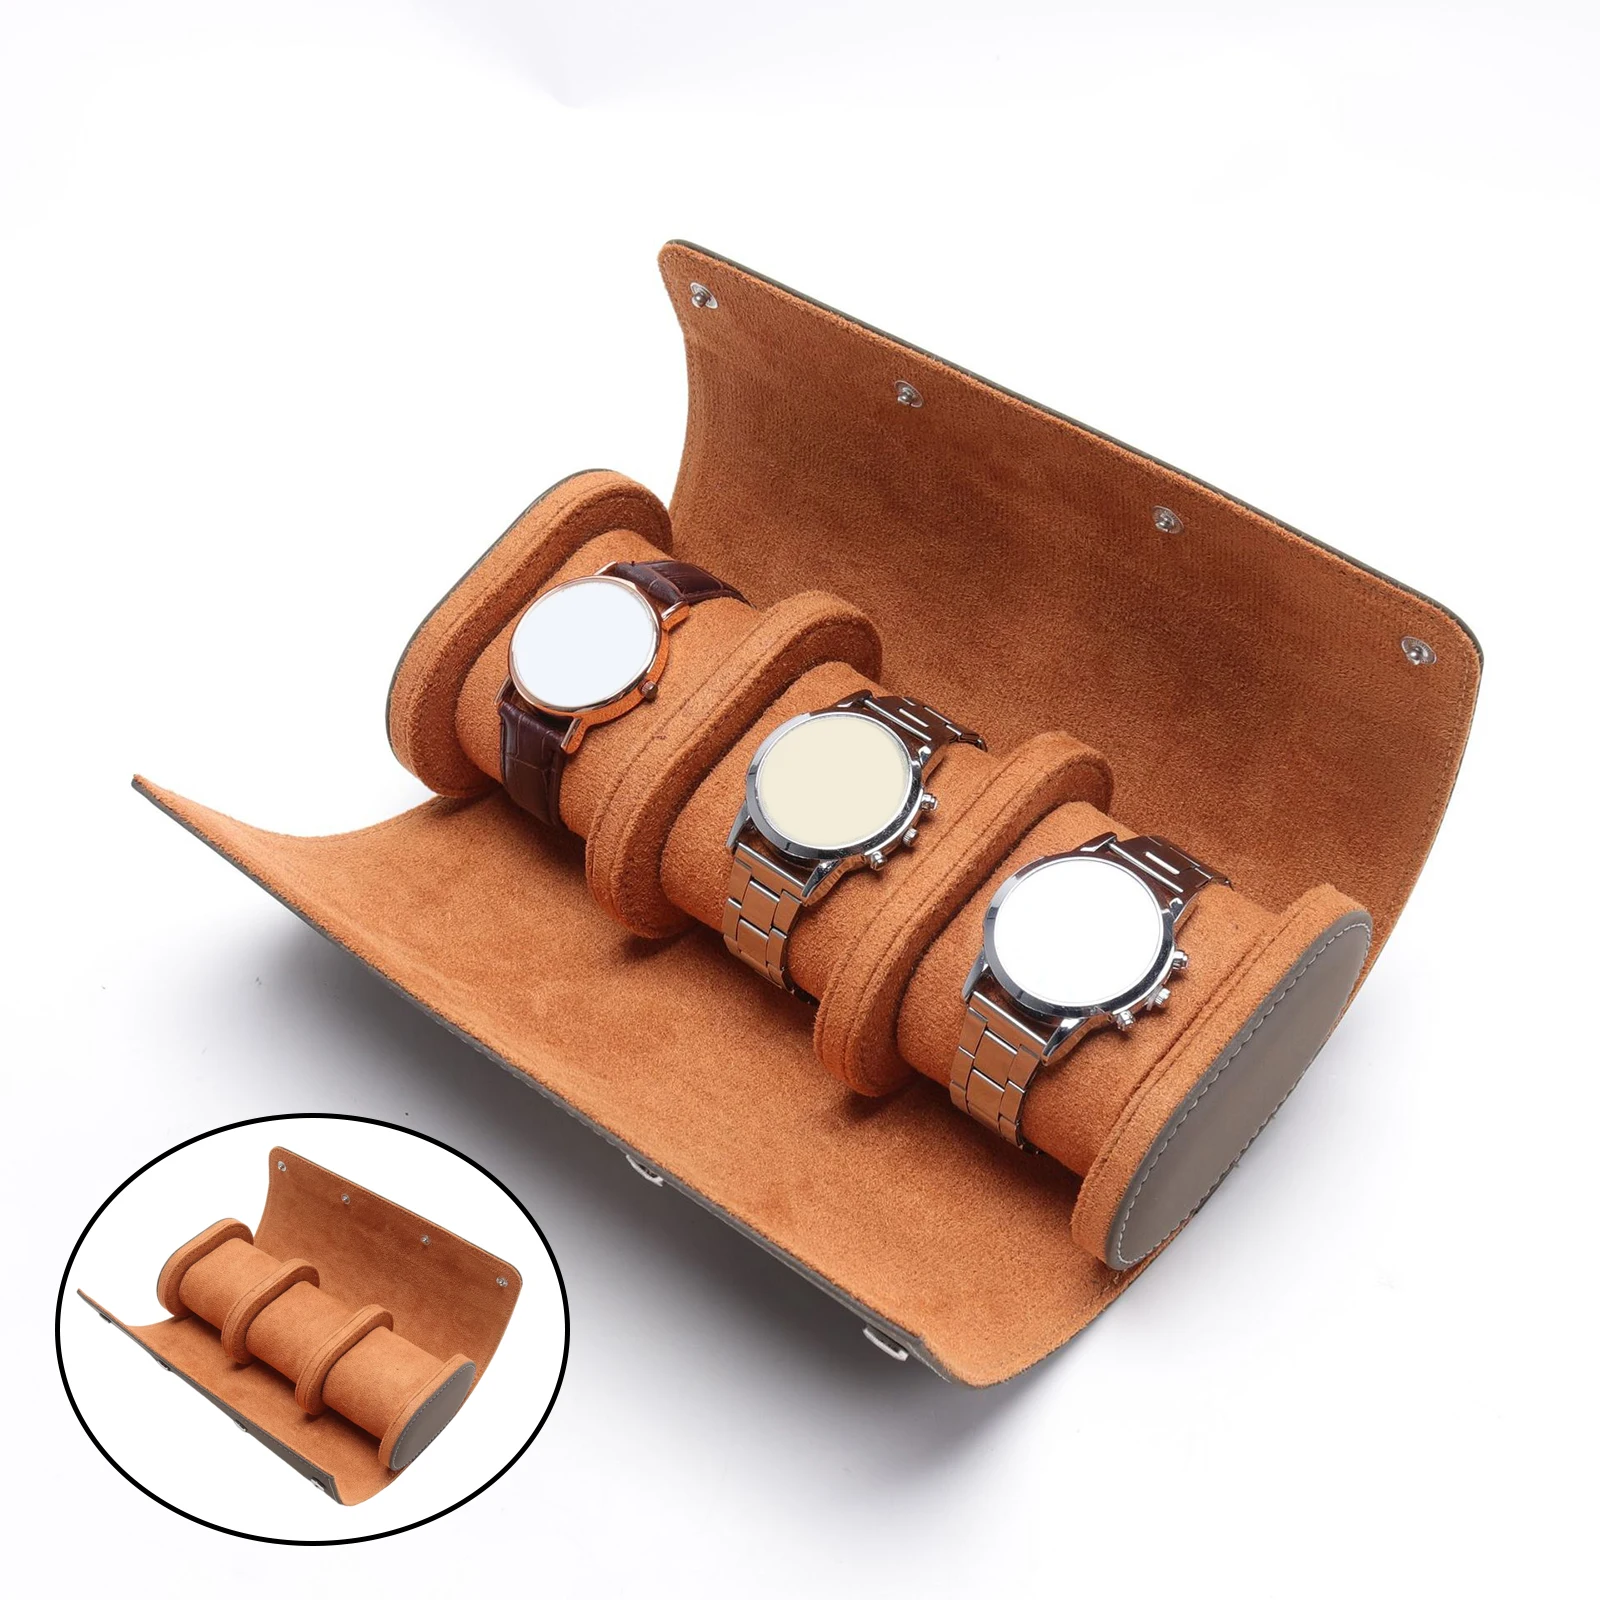 Hard Watch Case Chic Portable PU Leather Roll Box Organizer Storage Pouch Holder Display for 3 Watches, easy to carry with you